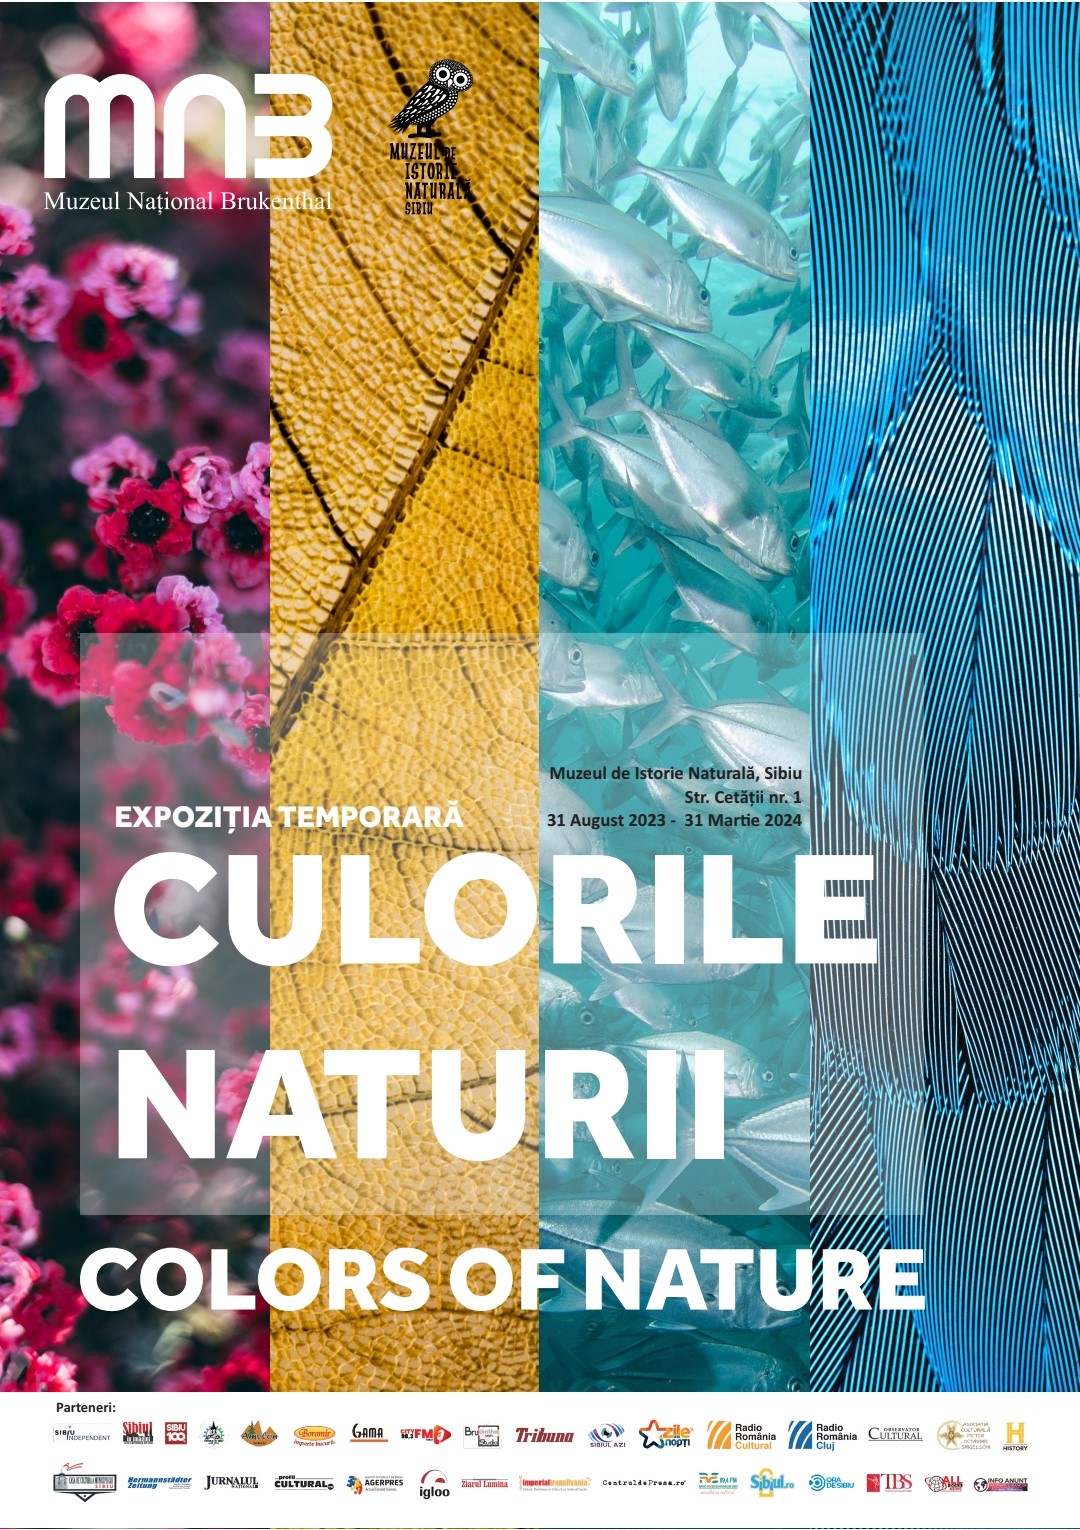 Exhibition: Colors of nature